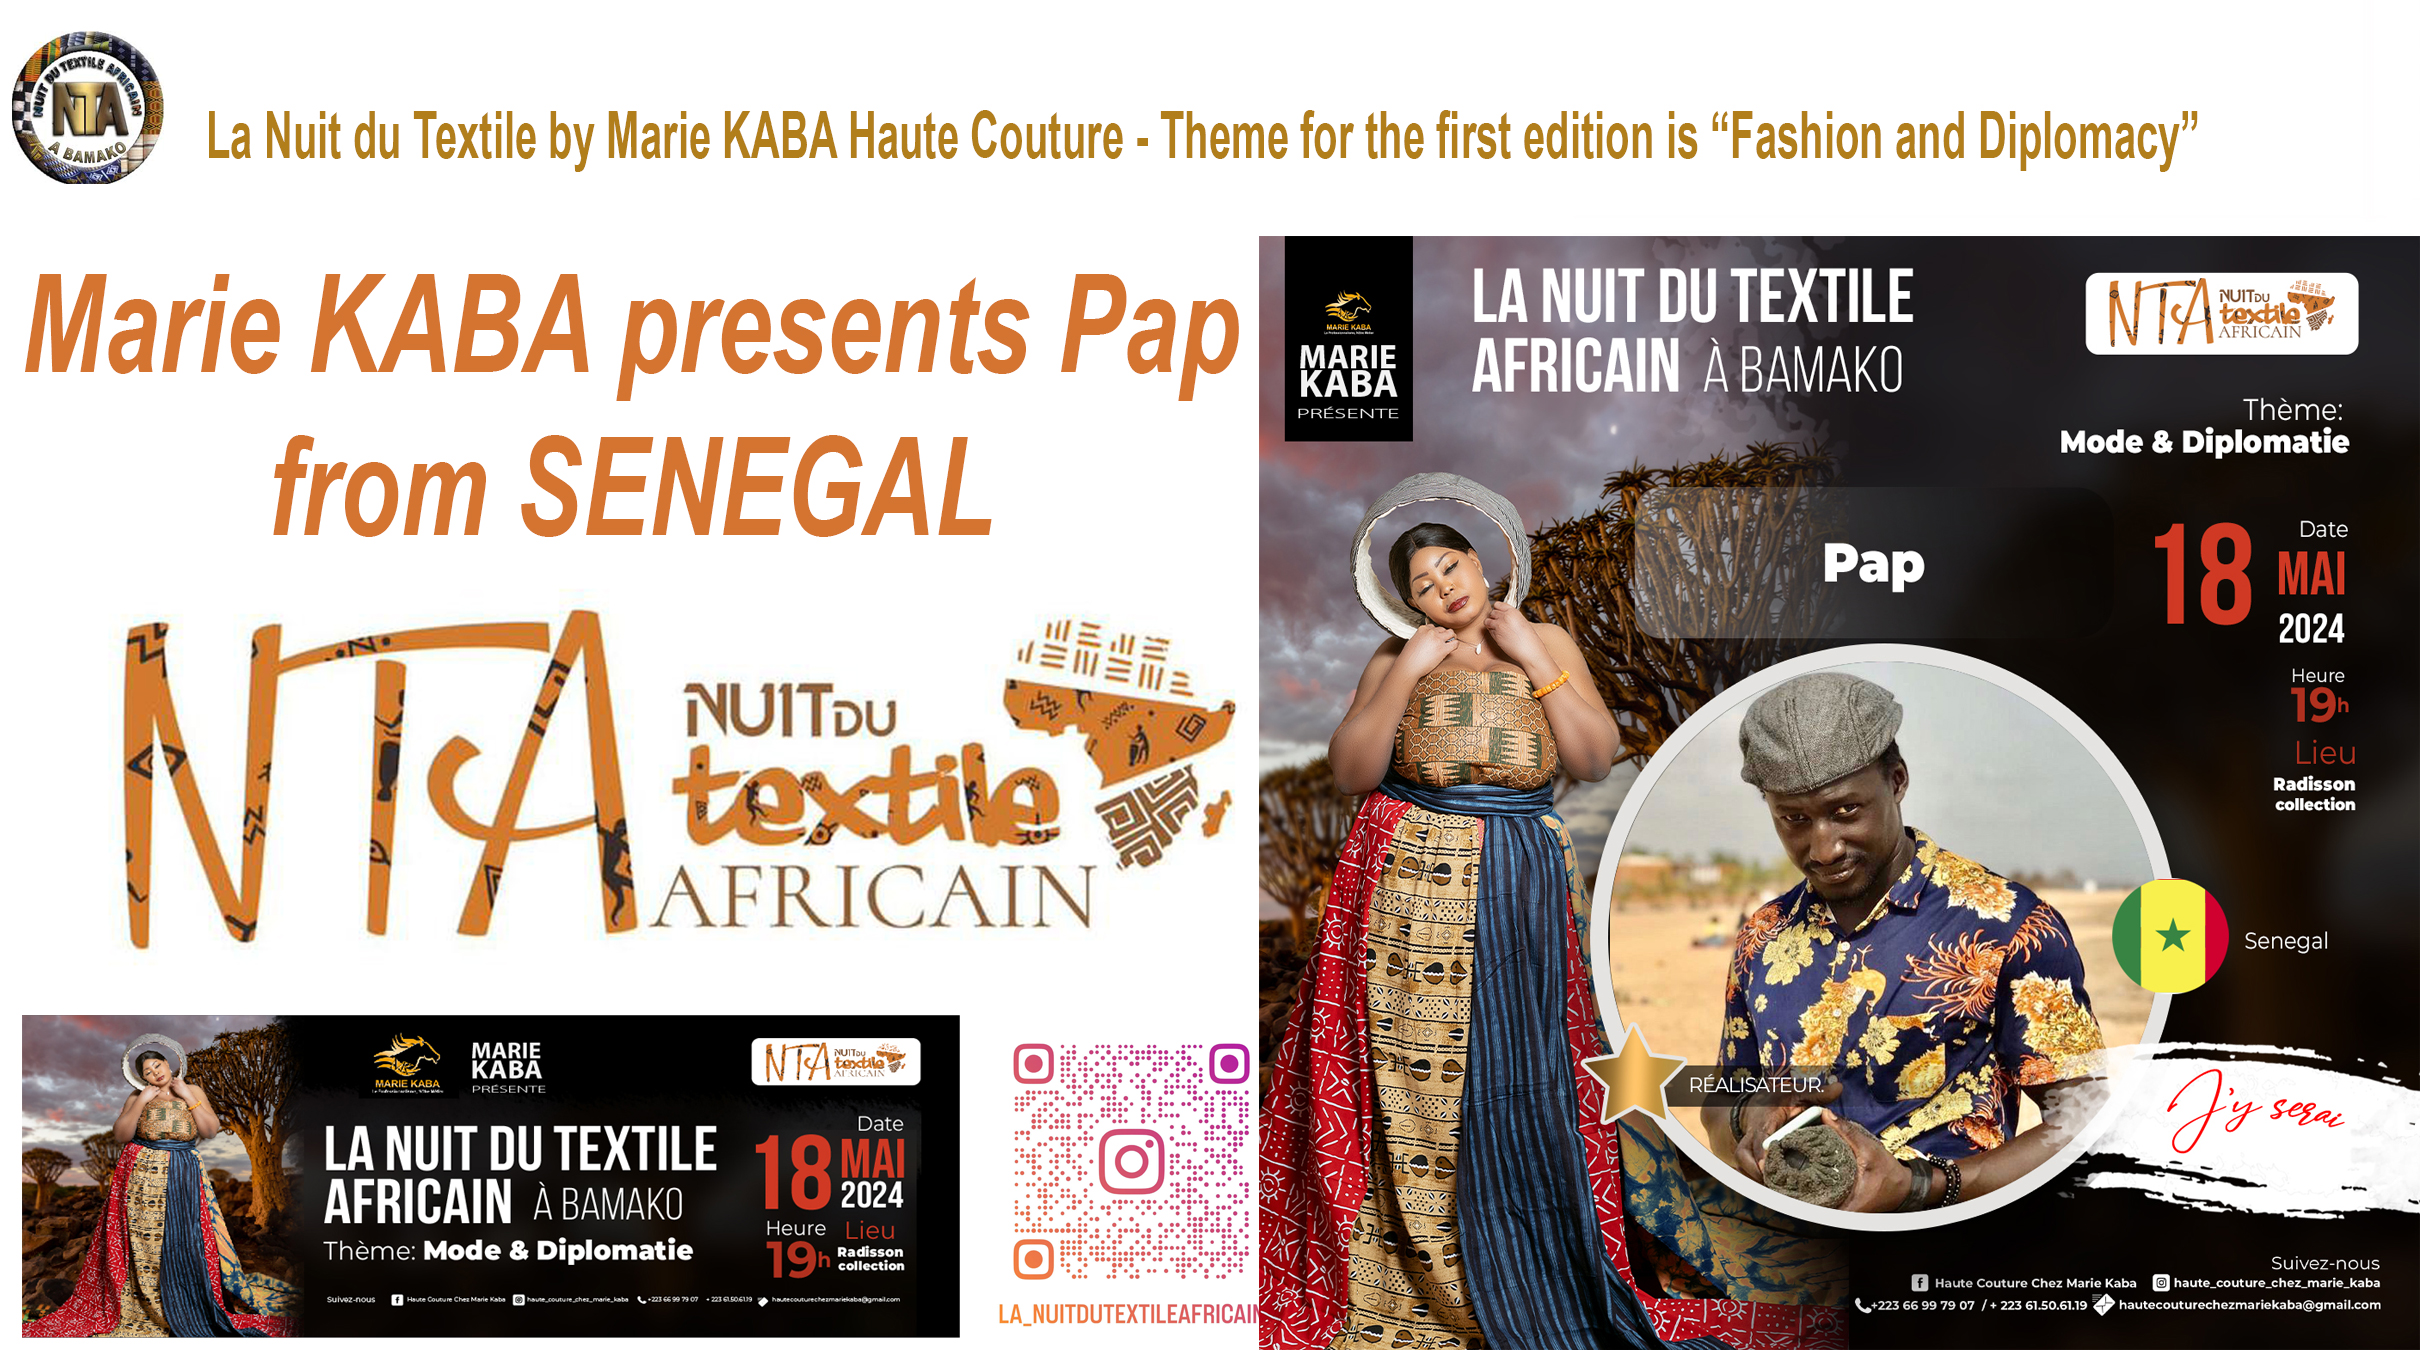 LA NUIT DU TEXTILE BY MARIE KABA HAUTE COUTURE – THEME FOR THE FIRST EDITION IS “FASHION AND DIPLOMACY” presents PAP Cameraman & Director from Senegal